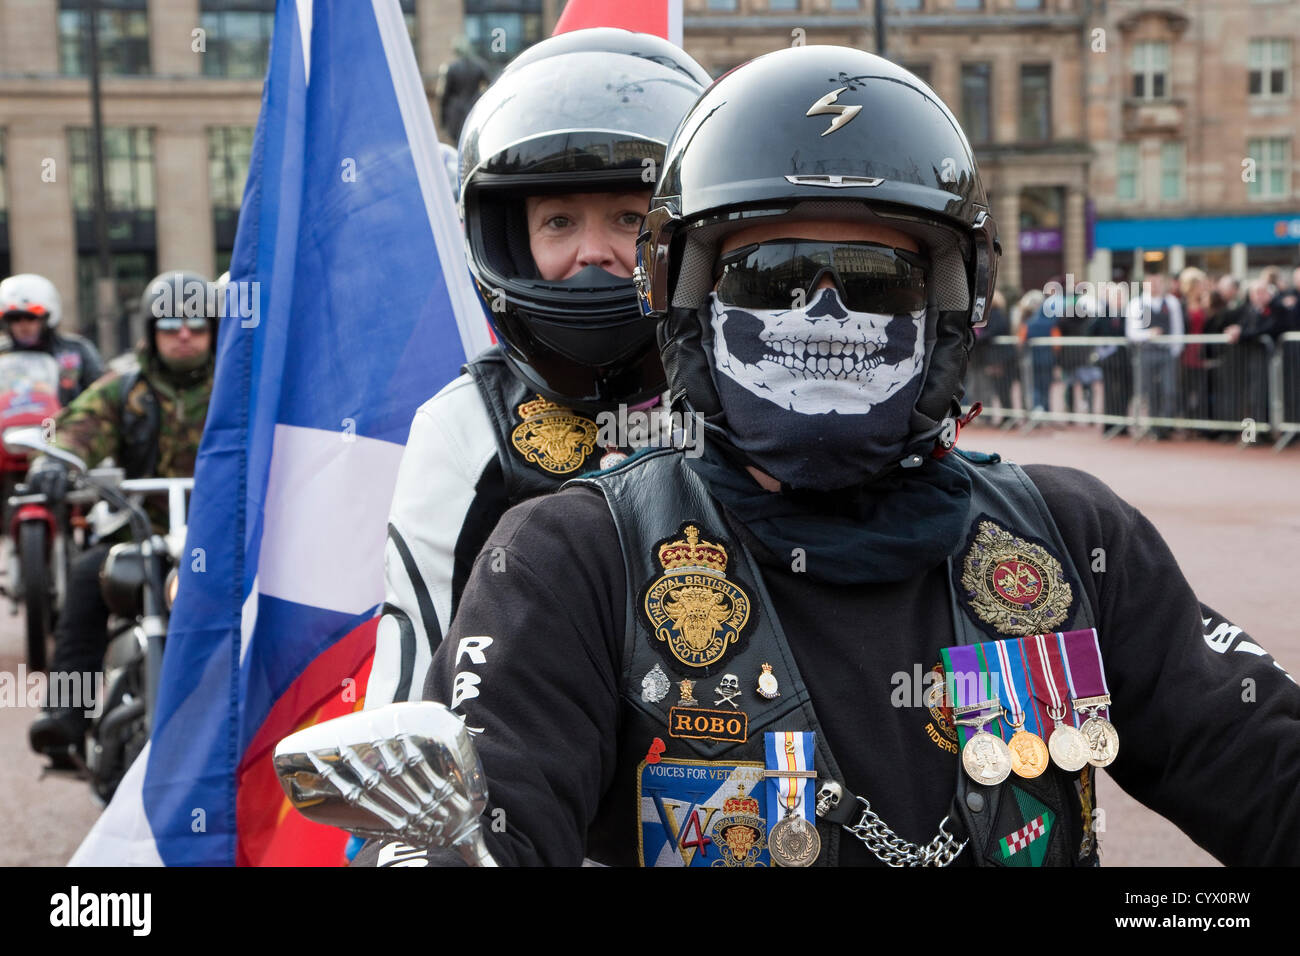 11 November 2012, Remembrance Day parade, George Square, Glasgow, Scotland. Members of the Royal British Legion Motorcycle Club, Scotland Branch taking part in the parade on their motorcycles. Stock Photo